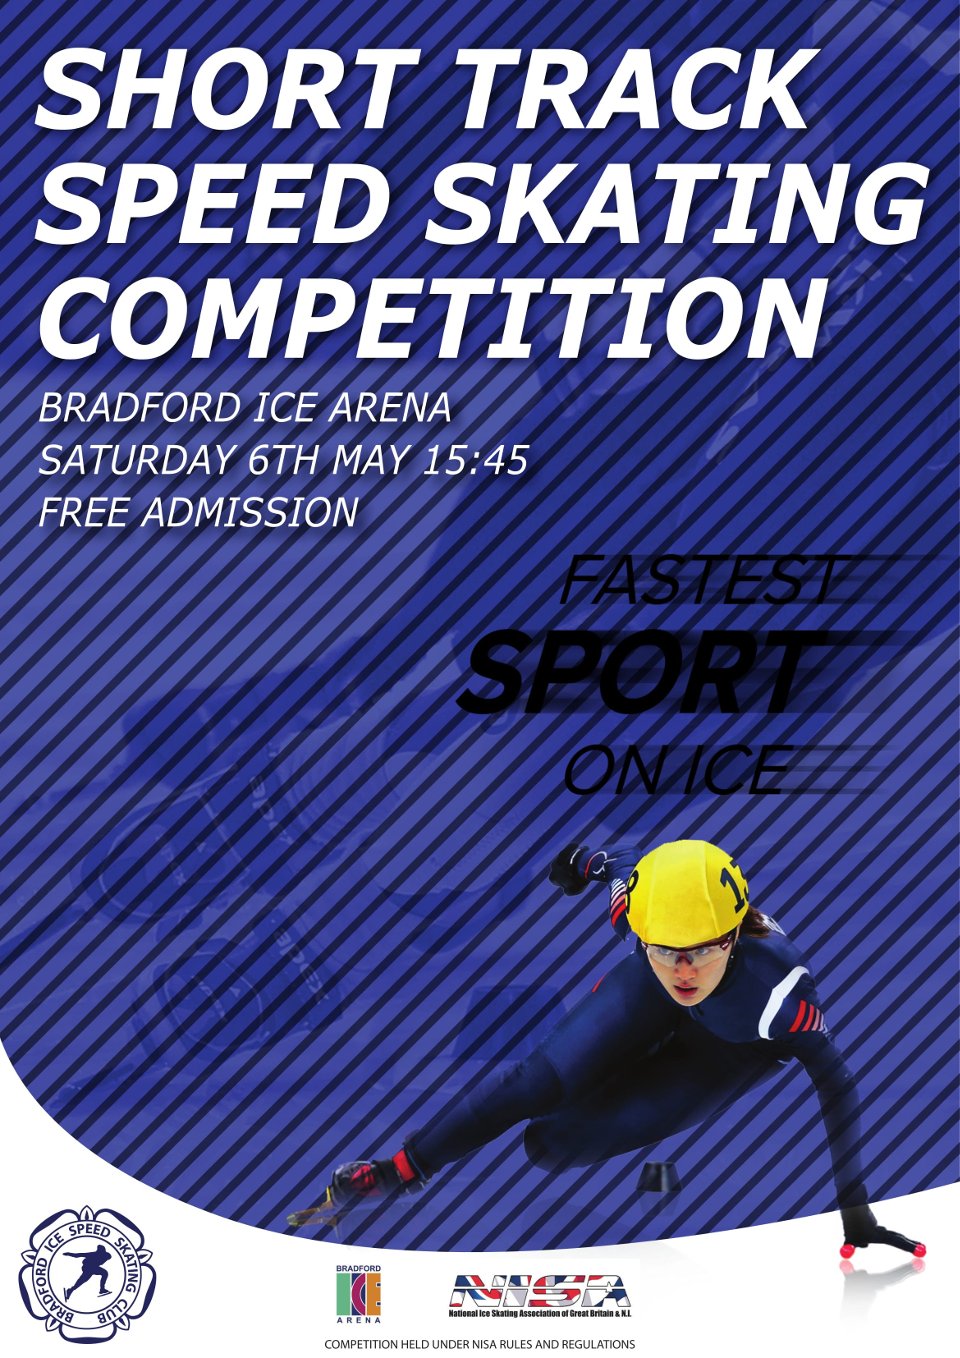 a busy looking flyer featuring a female ice skater